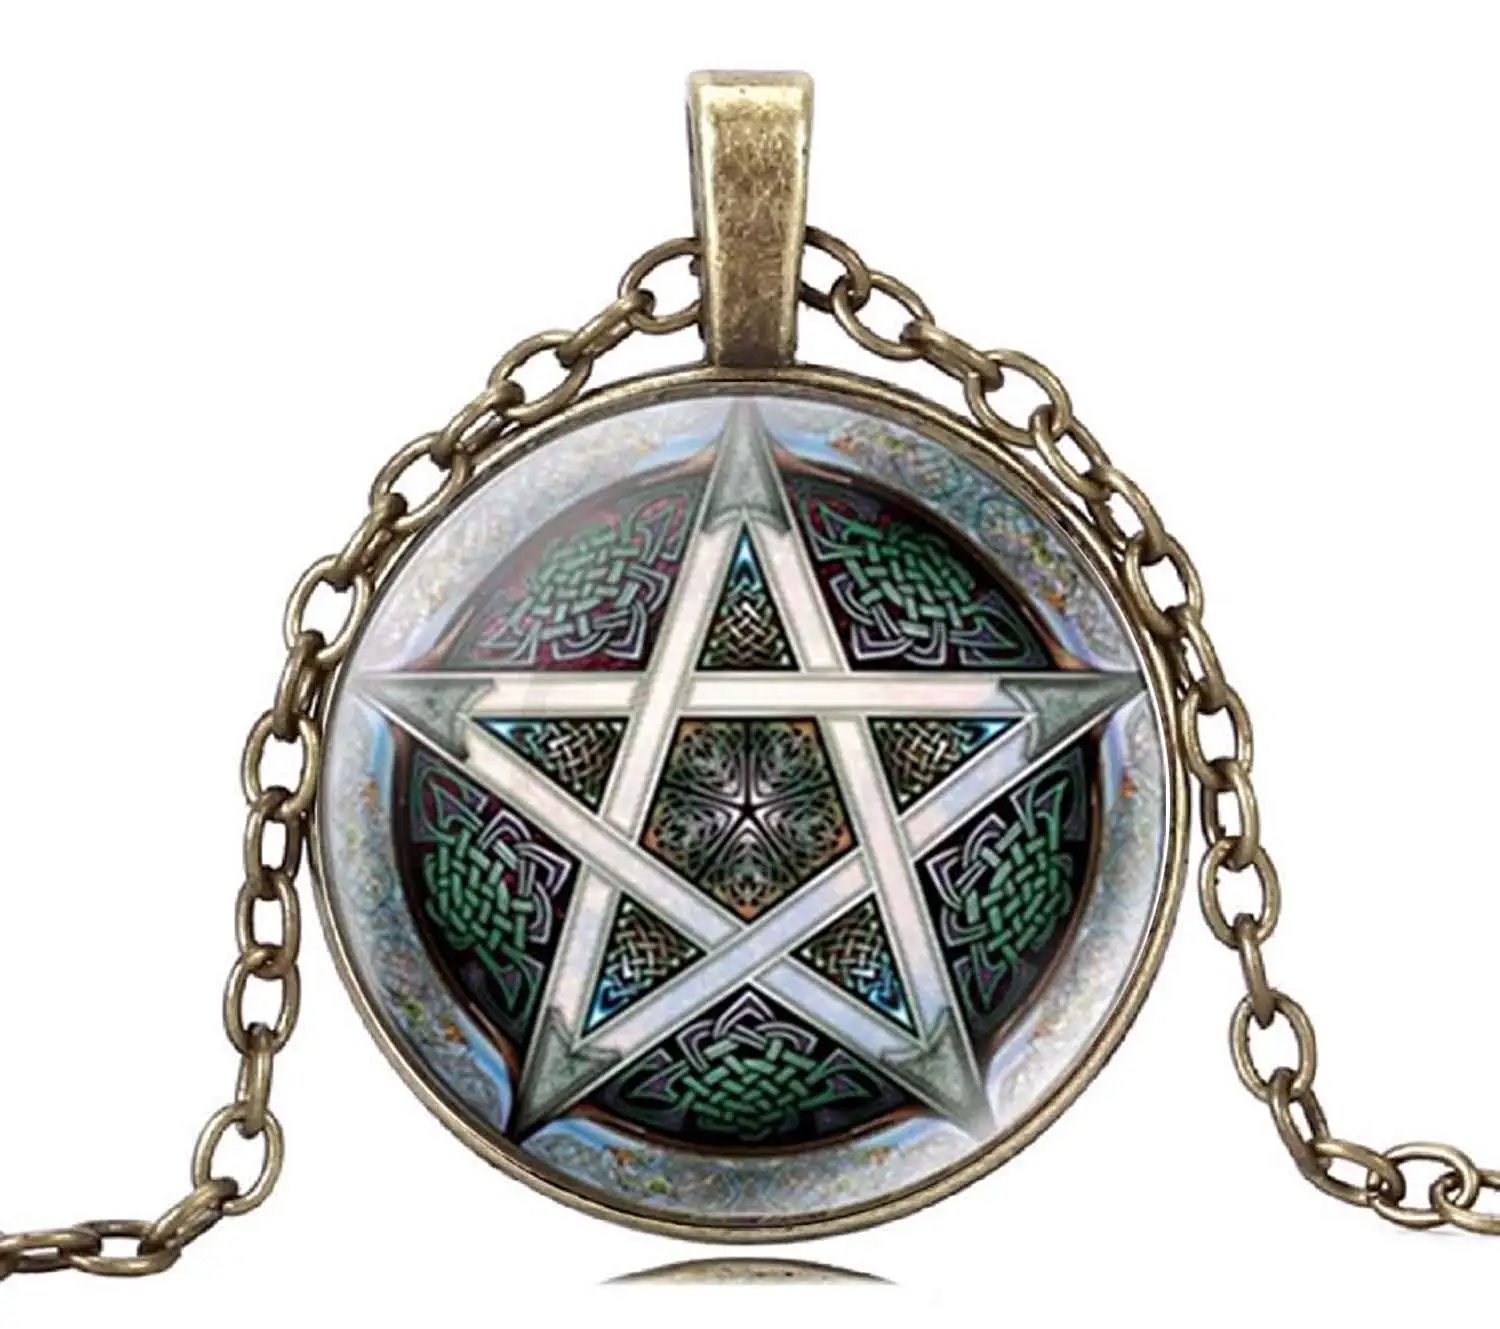 pentagram necklace with onyx stone meaning